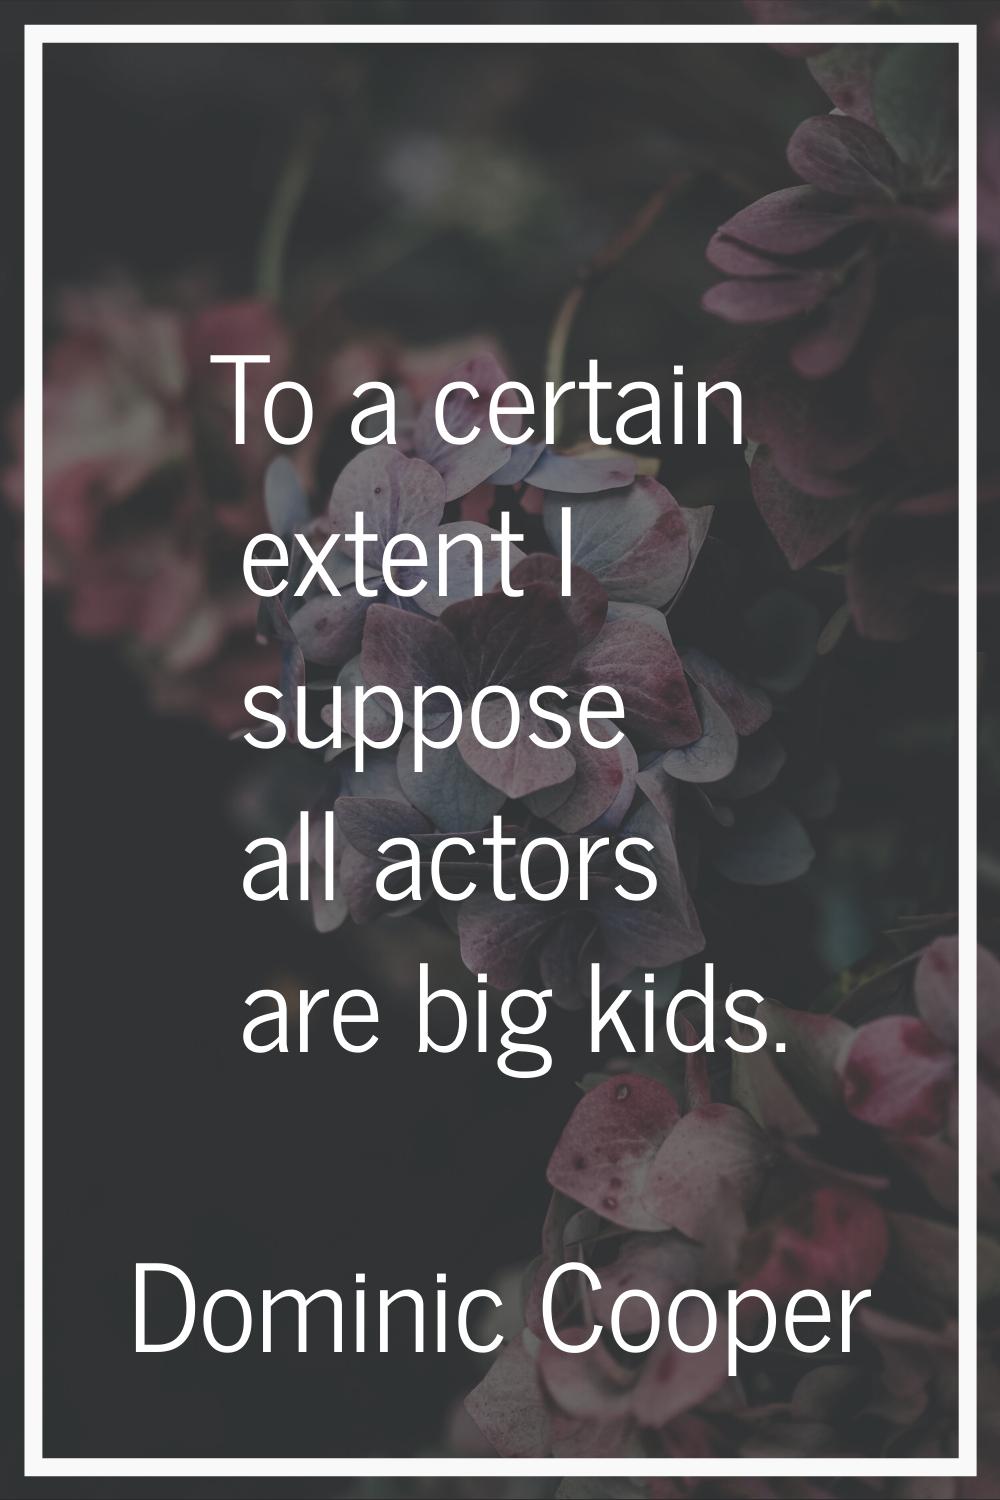 To a certain extent I suppose all actors are big kids.